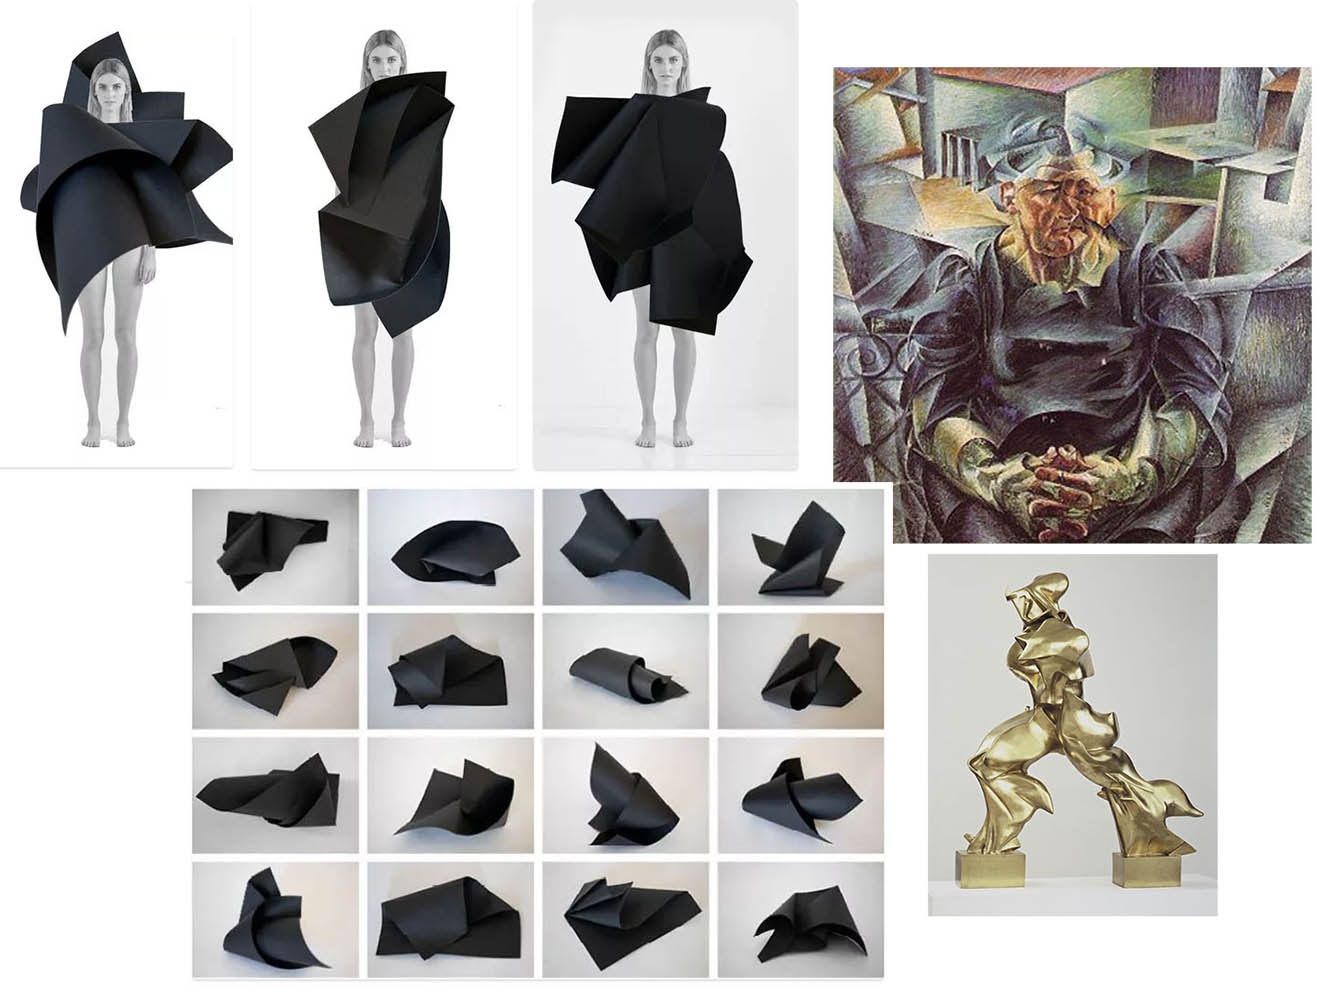 Multiple images including representation of fashion on a model, artwork and a statue that have inspired the artwork and images of the material in various layers and shapes